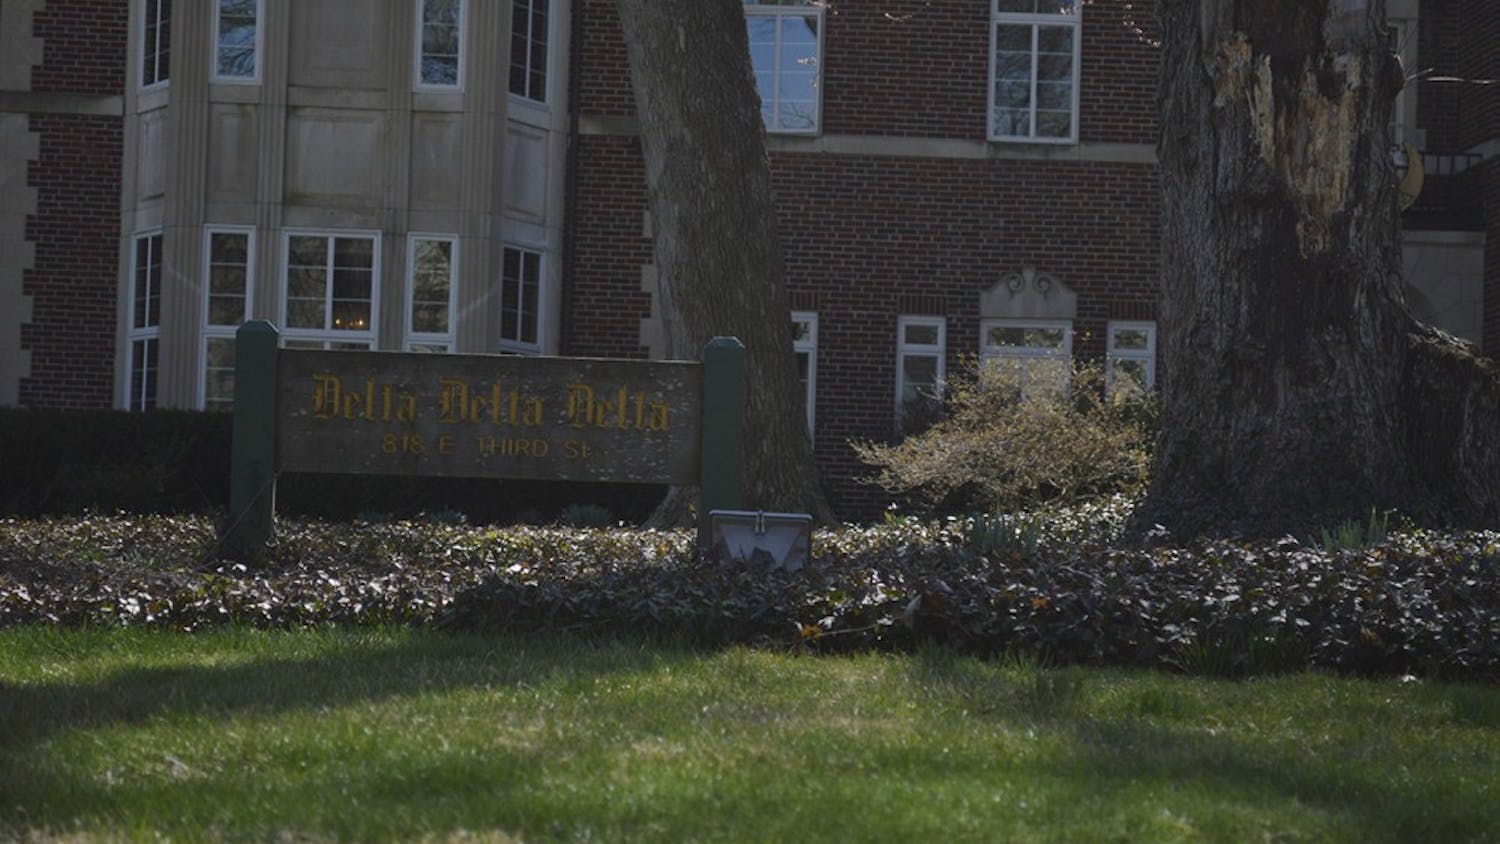 The Delta Delta Delta house sits on Third Street. The IU Delta Omicron chapter of Delta Delta Delta was revoked Saturday after the group's national organization said the IU members' activities clashed with Tri Delt's high standards and purpose.